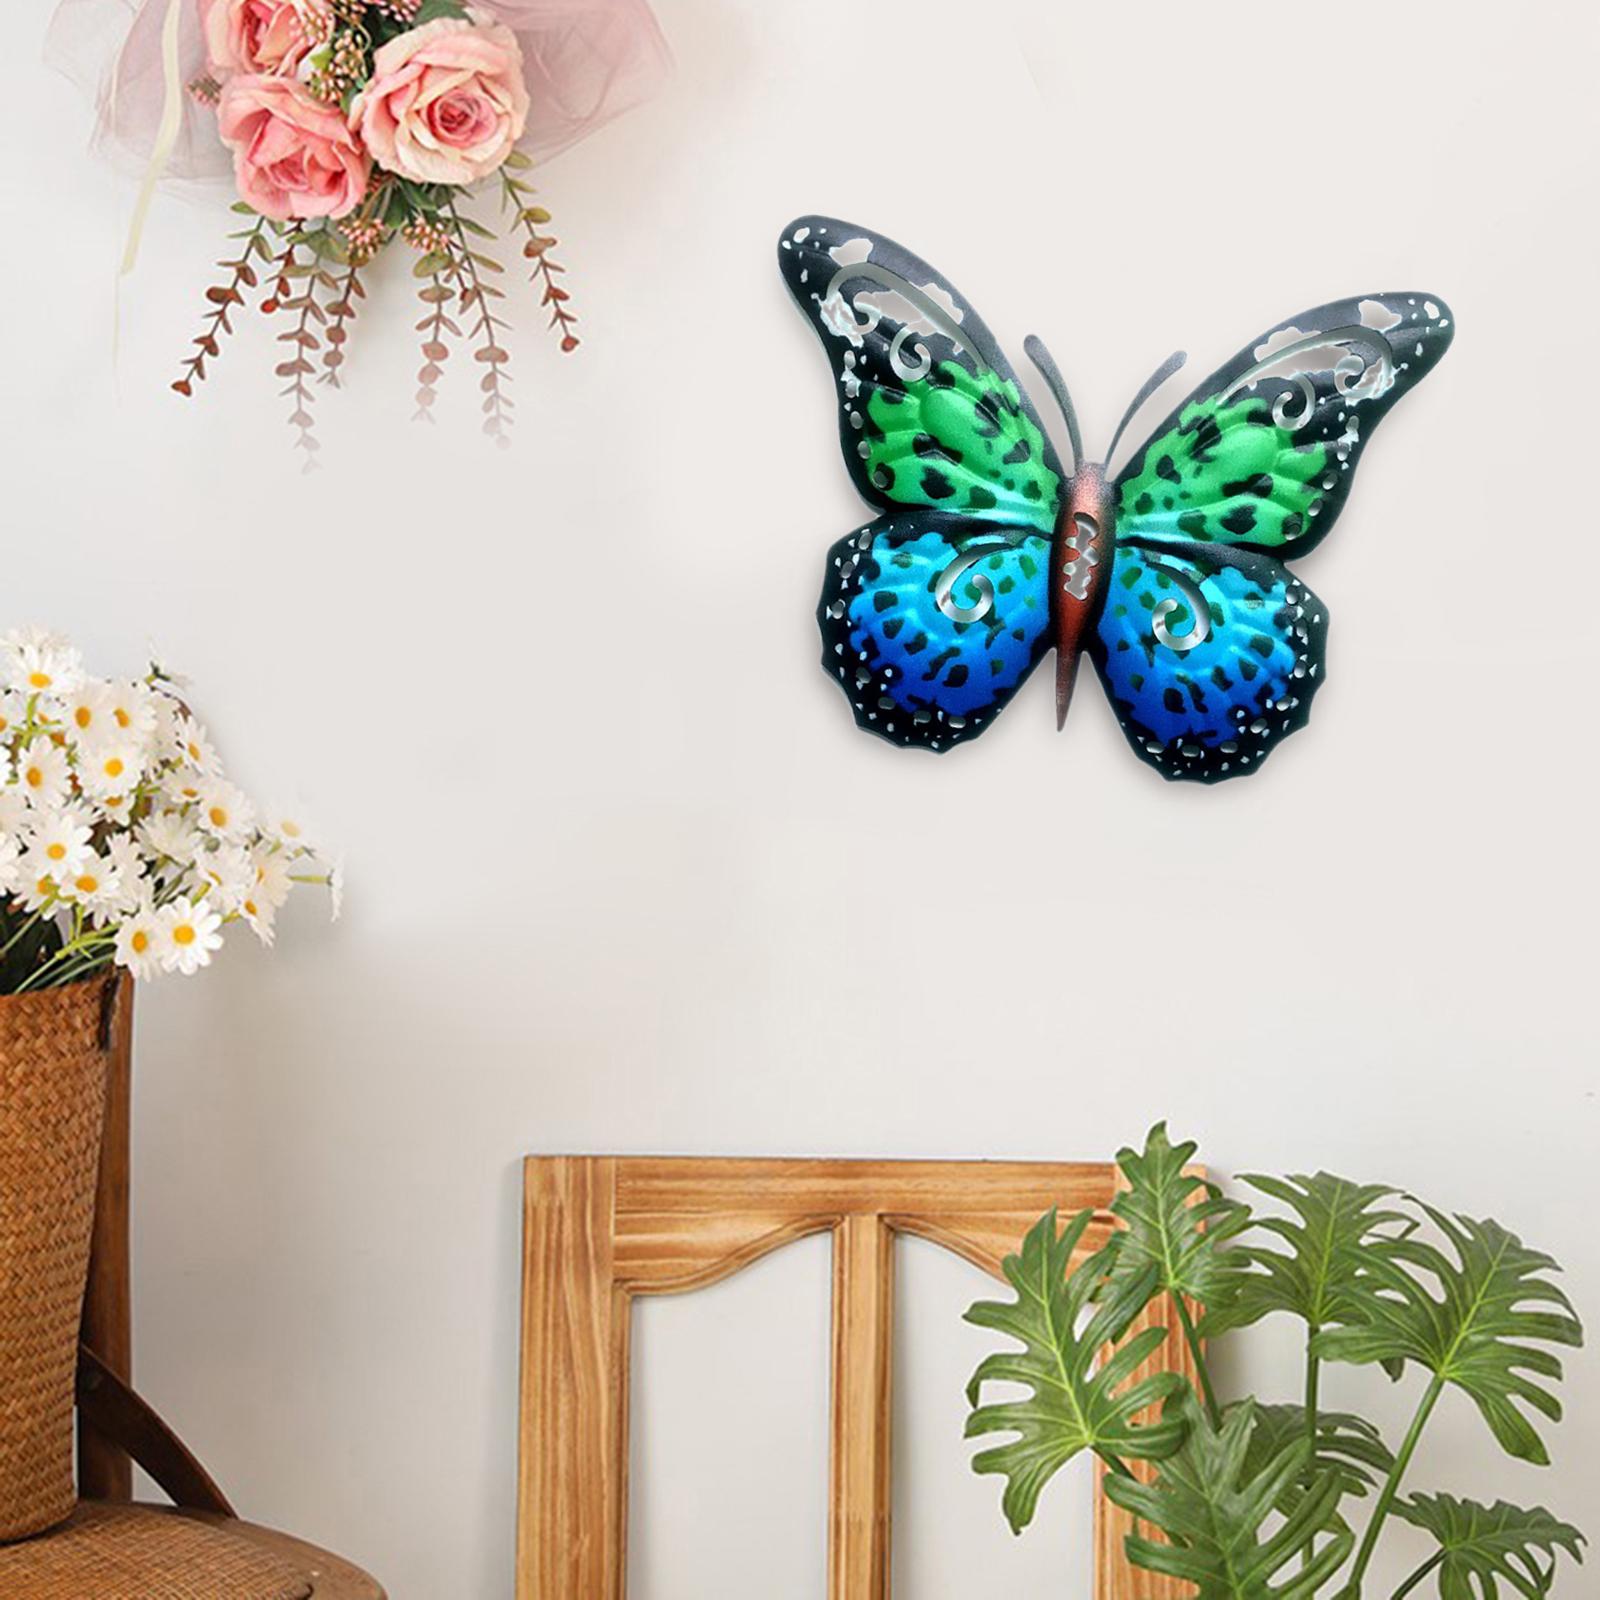 Creative Butterfly Wall Sculpture Art Decoration for Indoor Bedroom Yard Blue Green